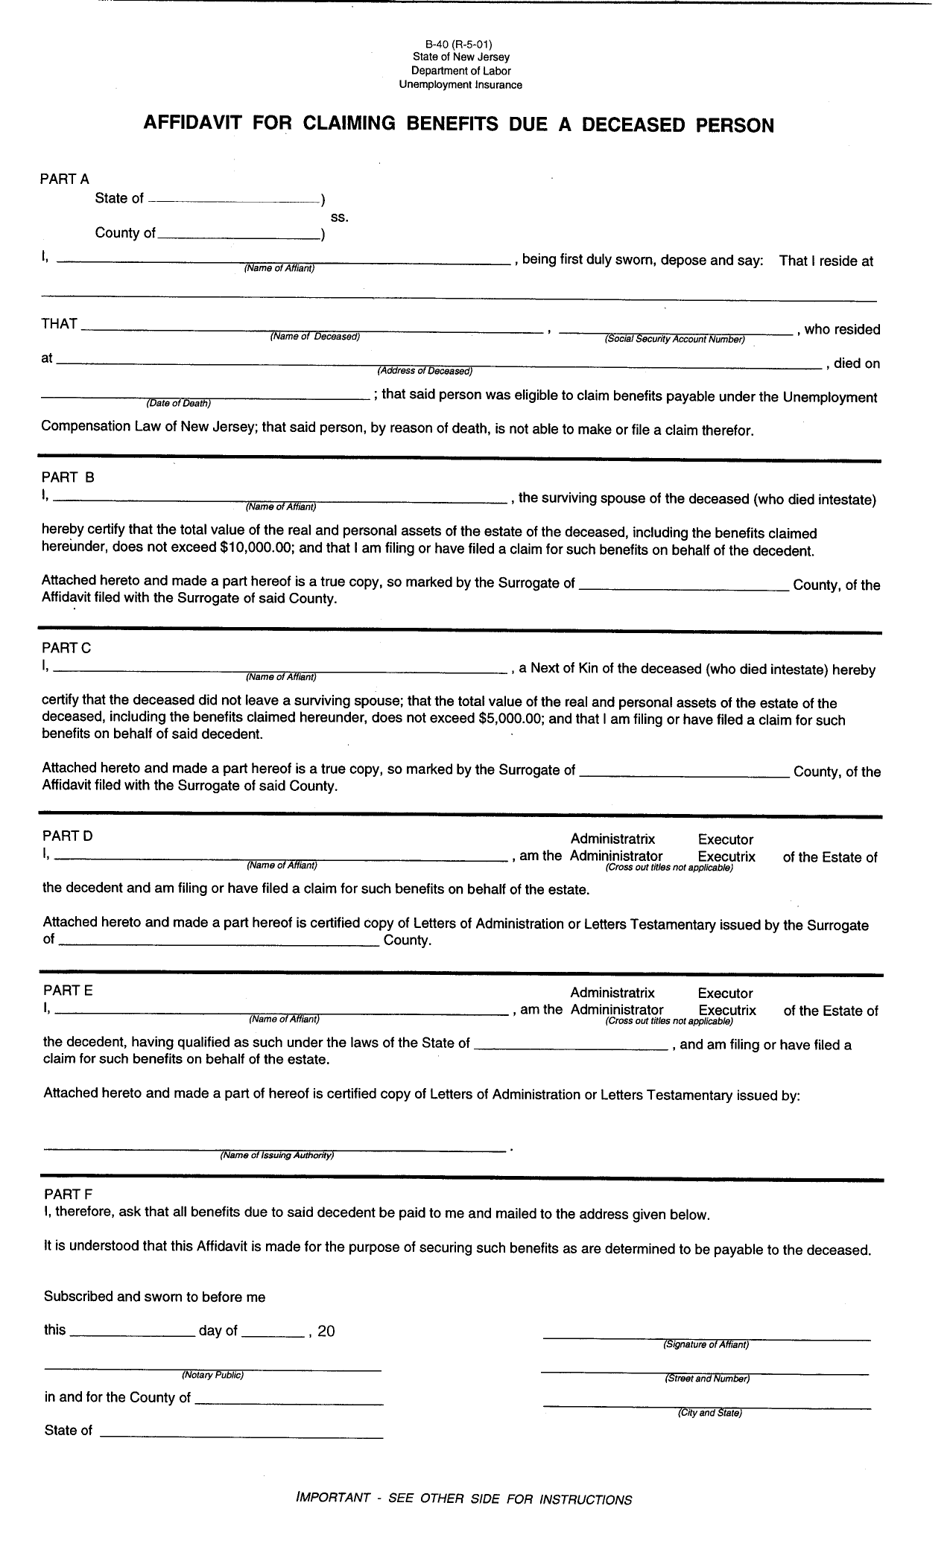 Form B-40 Affidavit for Claiming Benefits Due a Deceased Person - New Jersey, Page 1